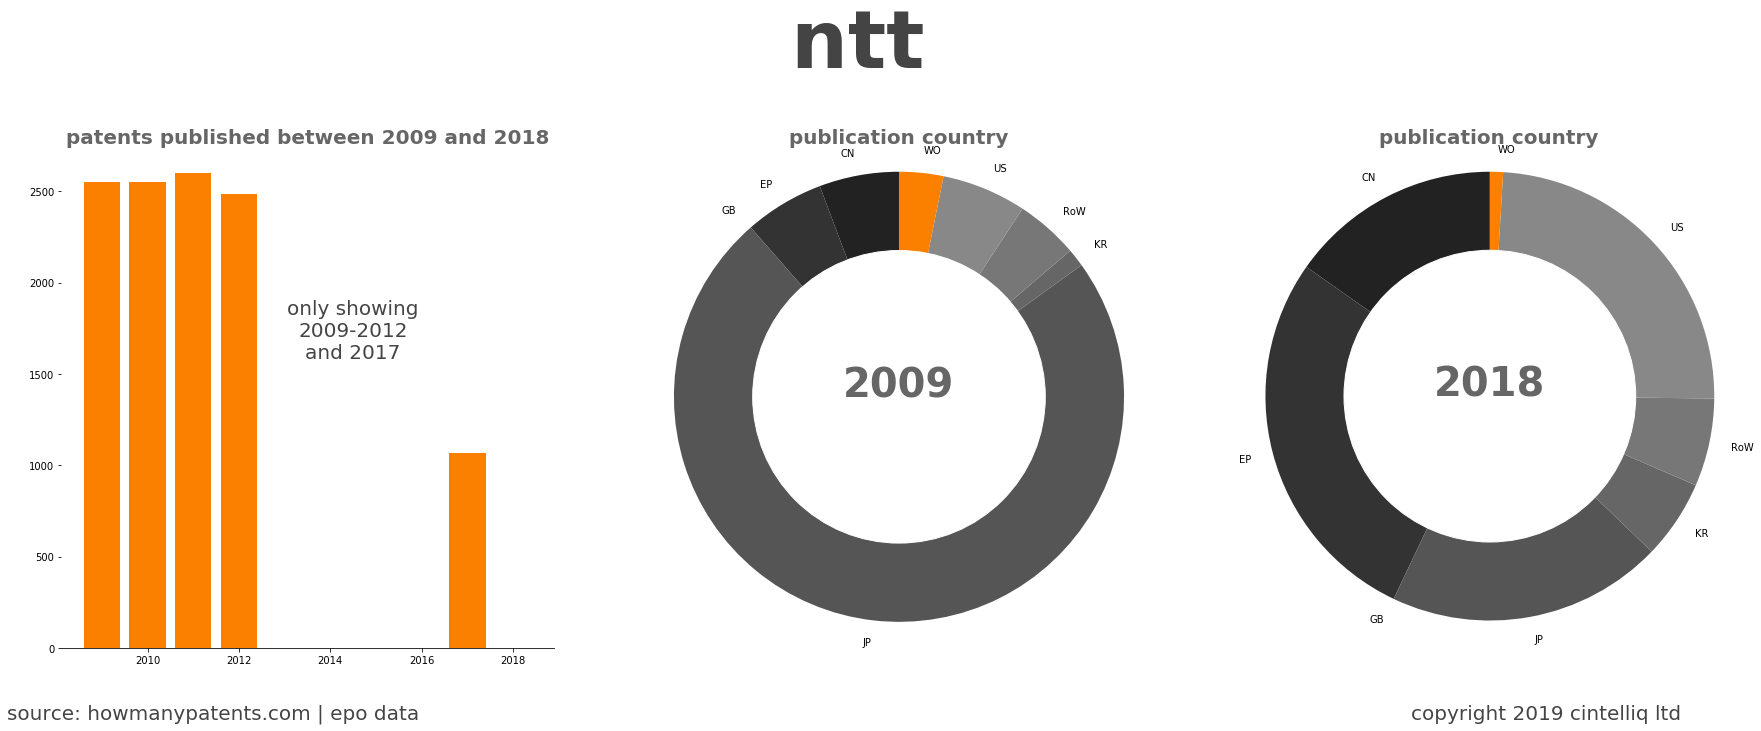 summary of patents for Ntt 